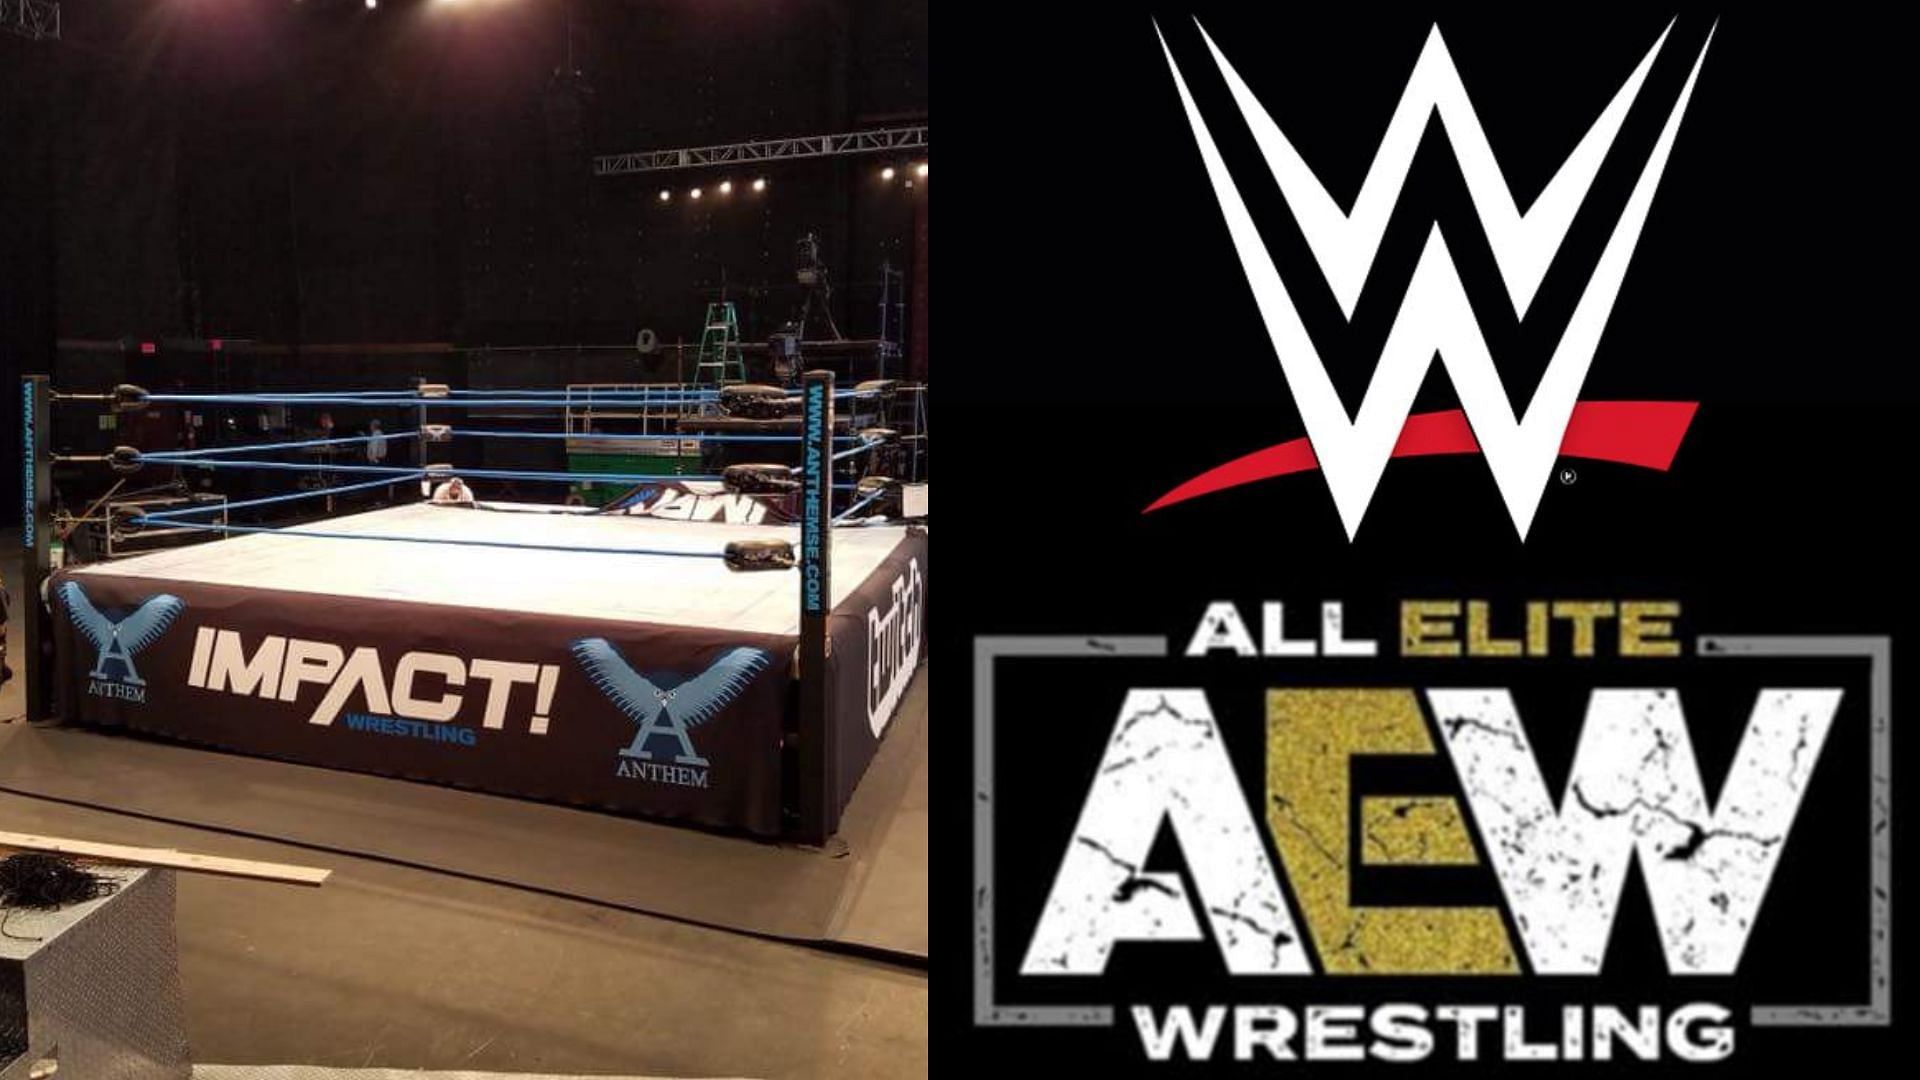 Find out which former AEW and WWE Superstar made their IMPACT Wrestling debut